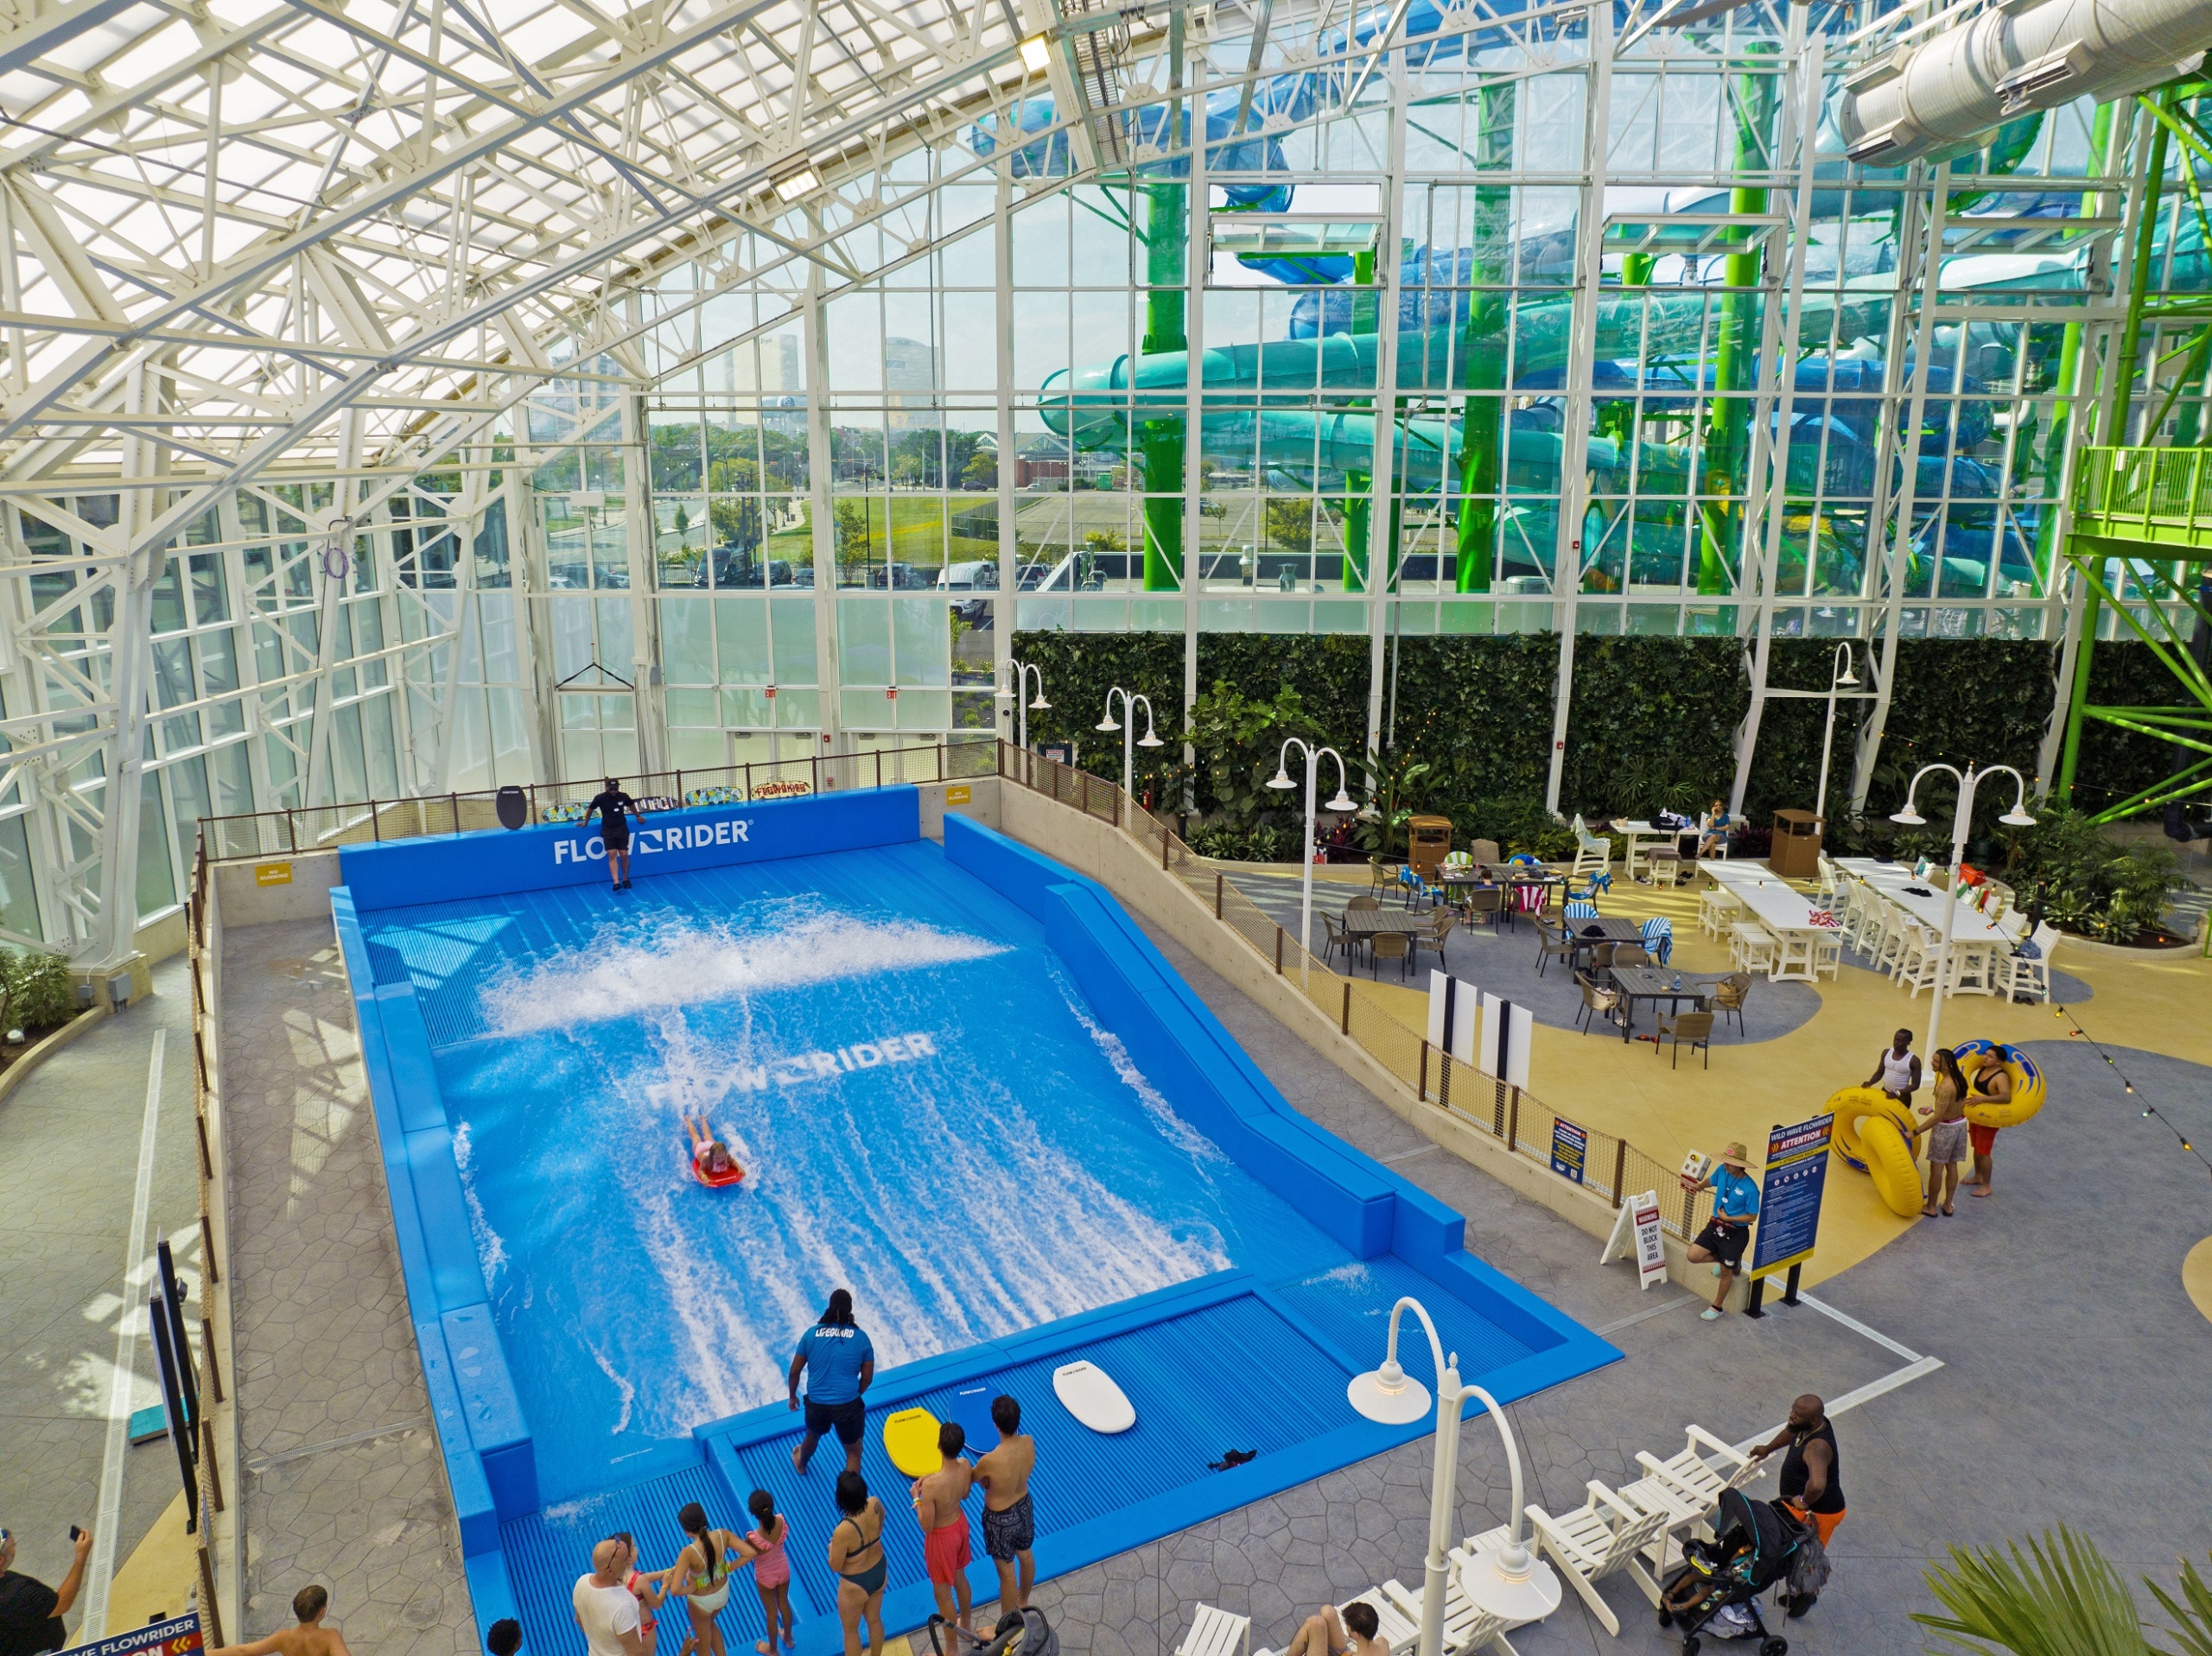 People looking at person on surf machine at an indoor water park